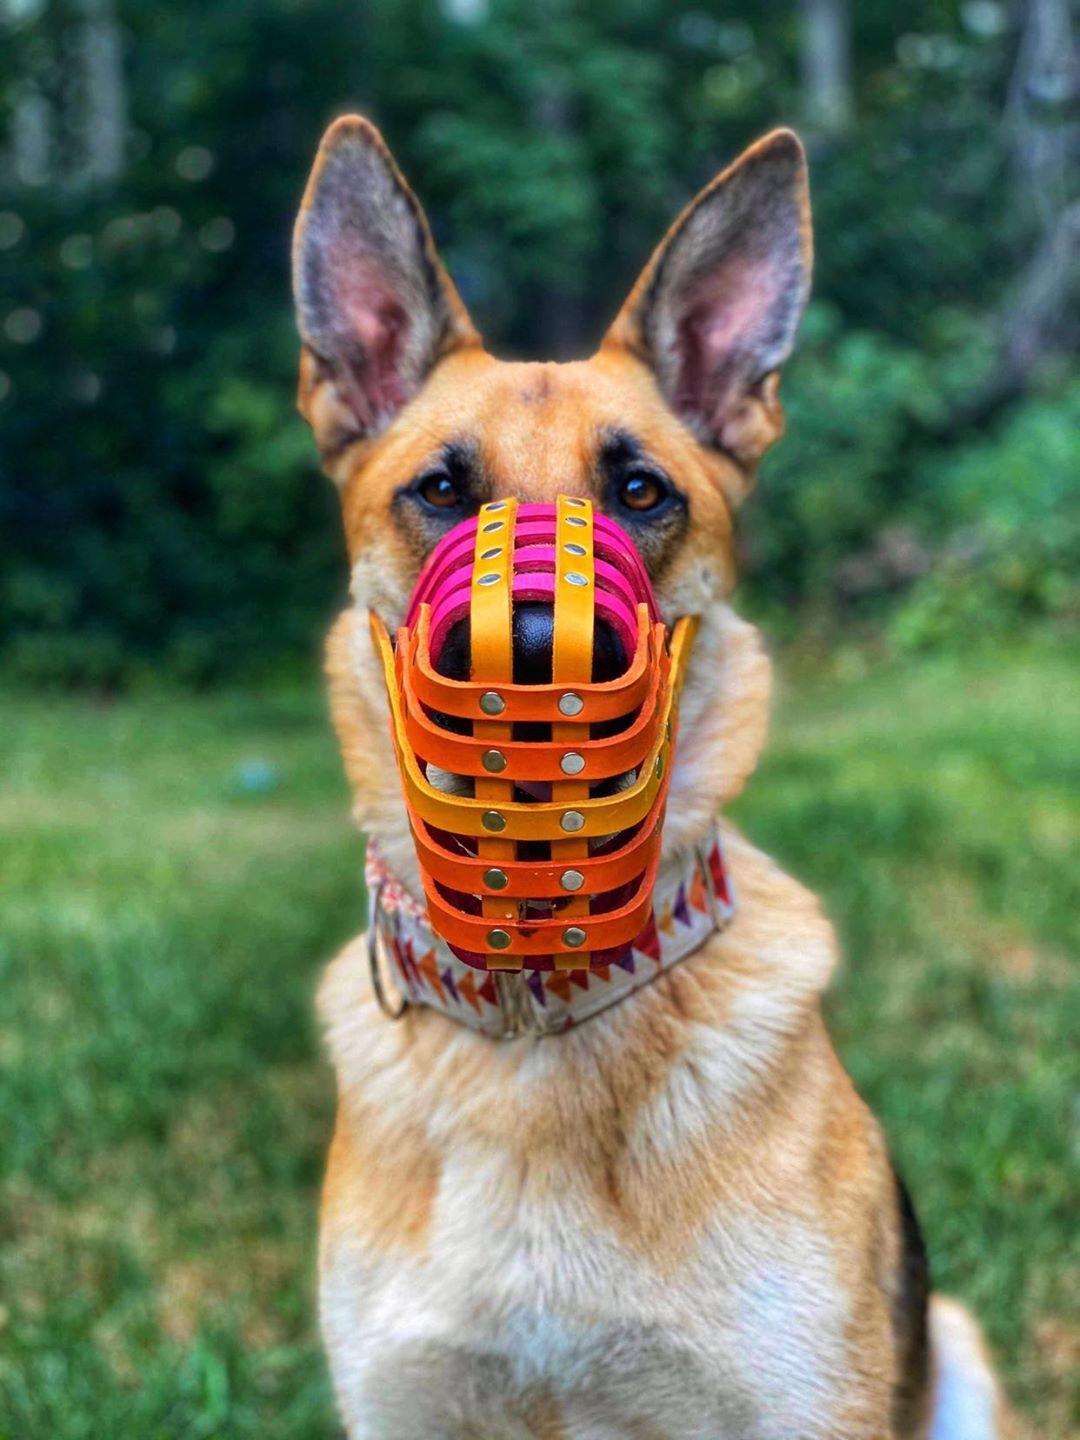 Basket Style Leather Muzzle - Choose Your Colors - Level Two